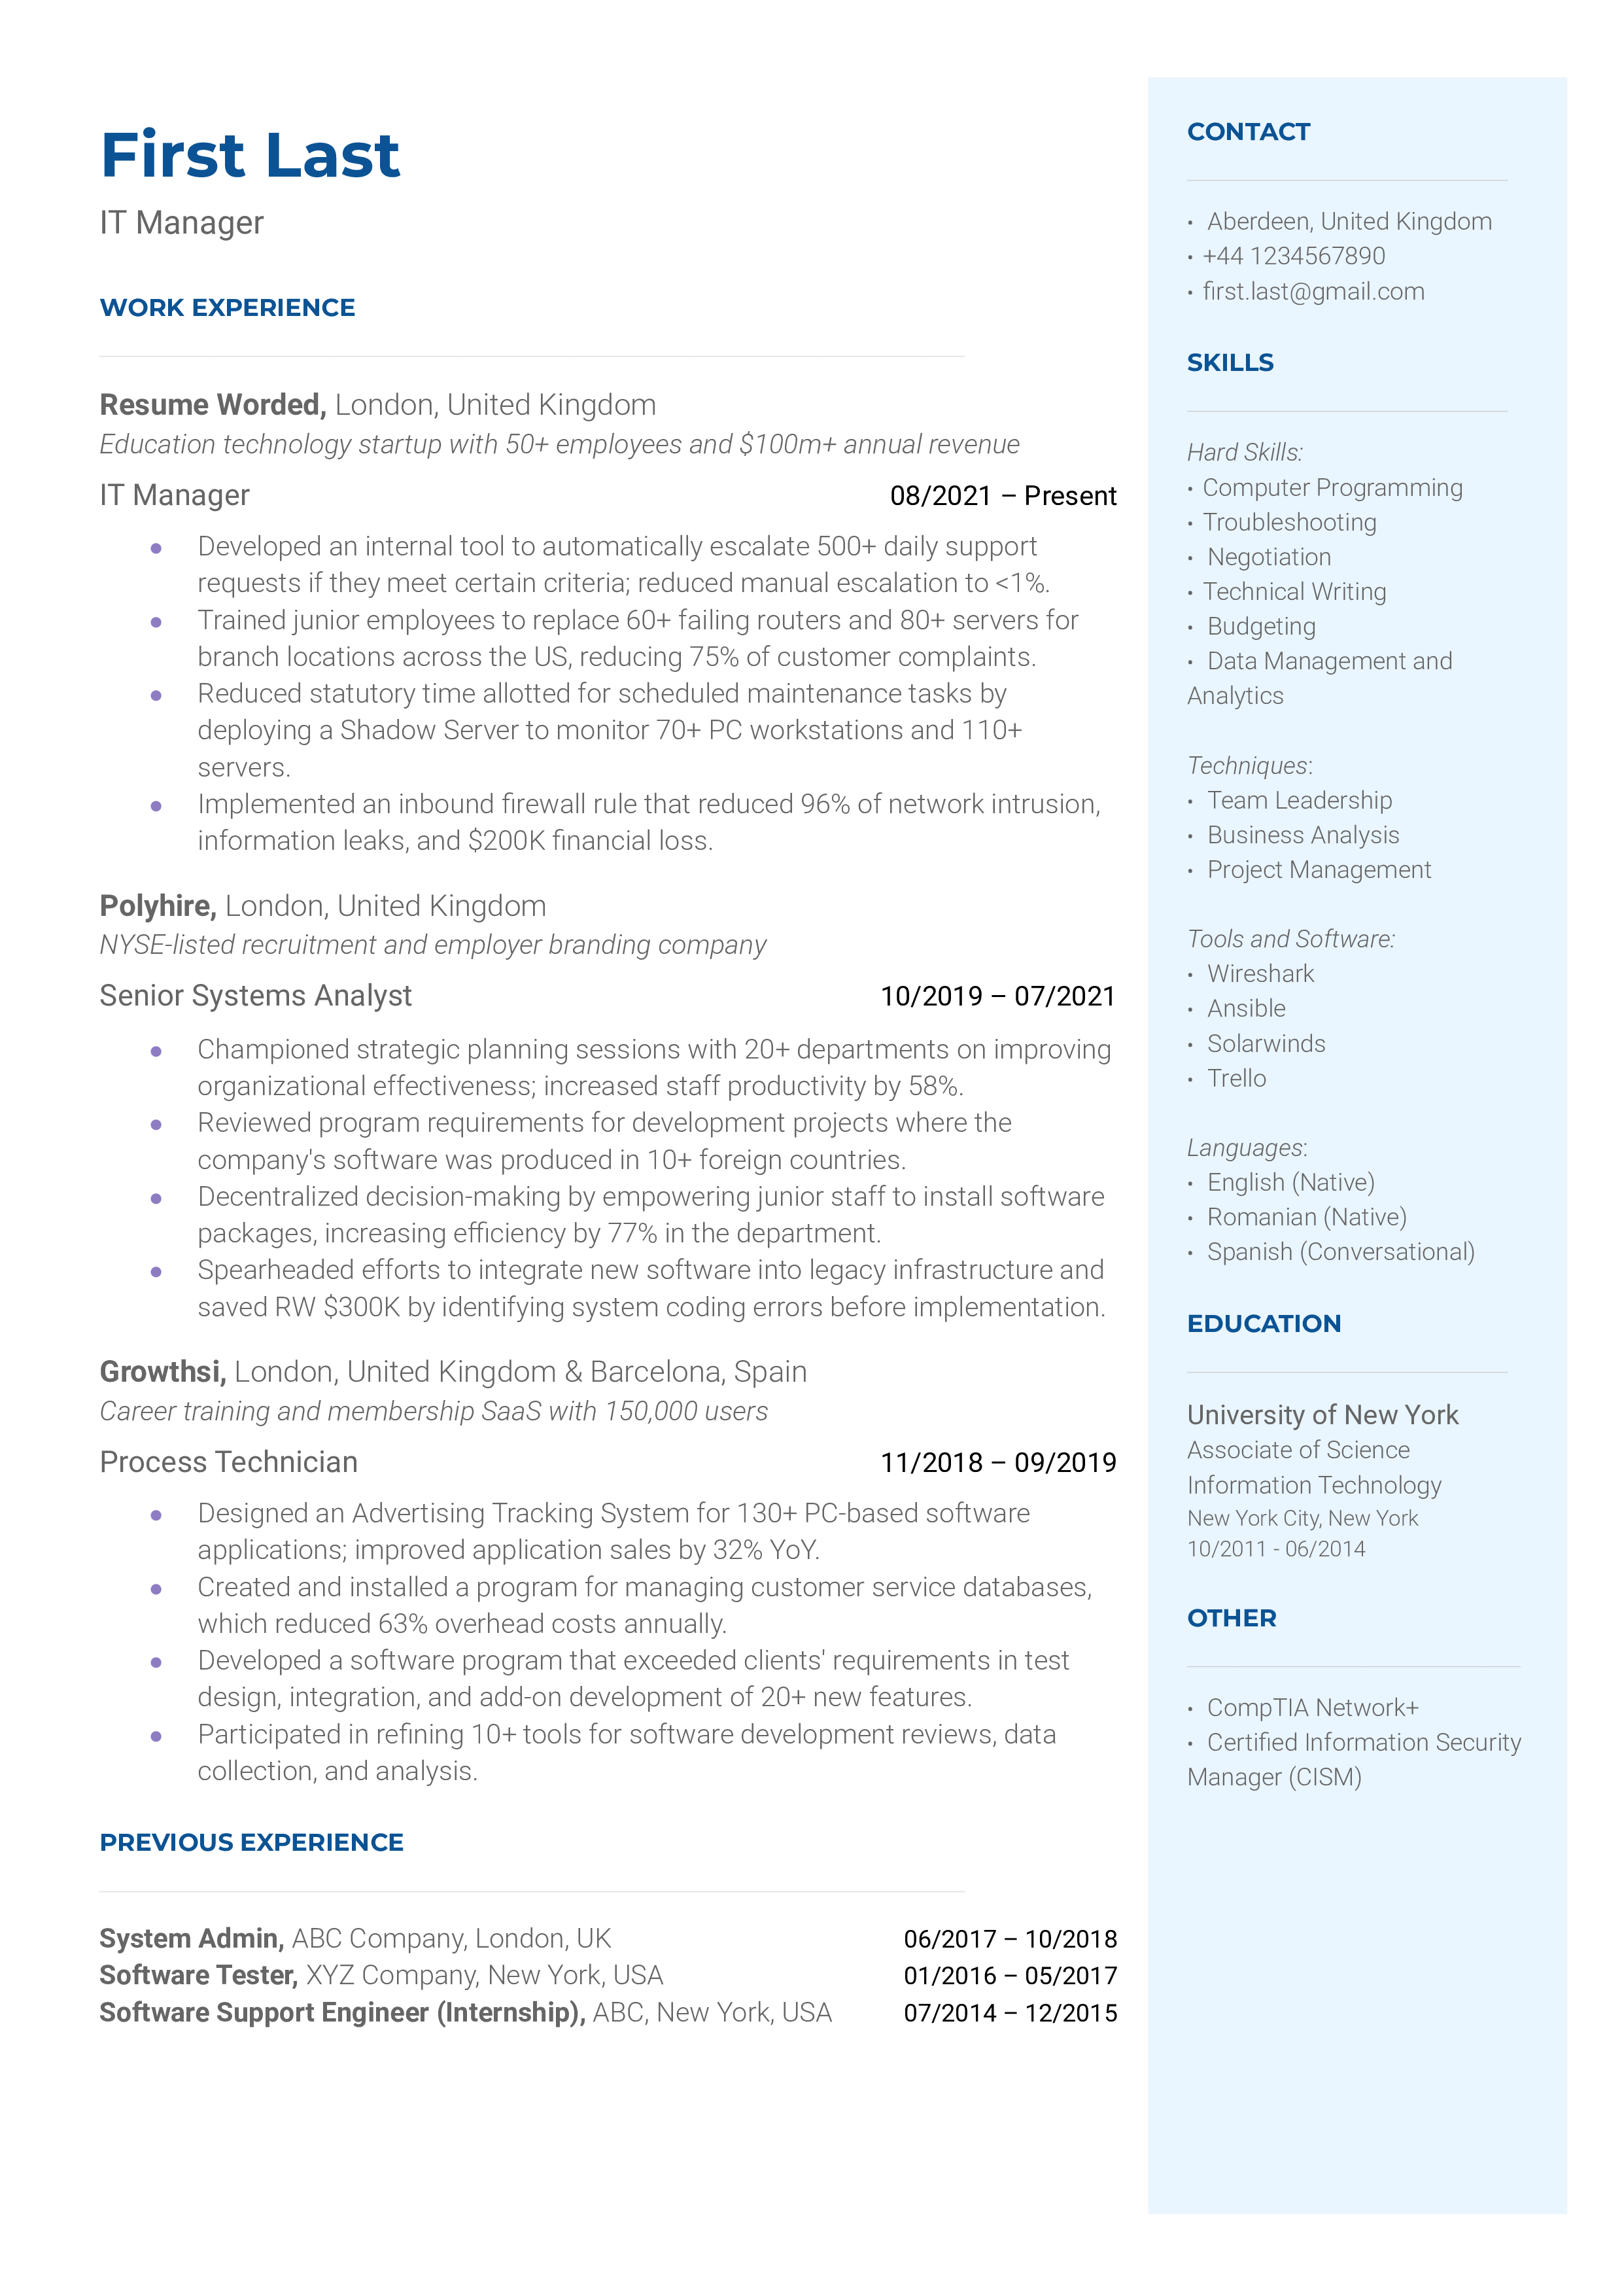 An IT Manager's CV highlighting project management skills and expertise in trending technologies.